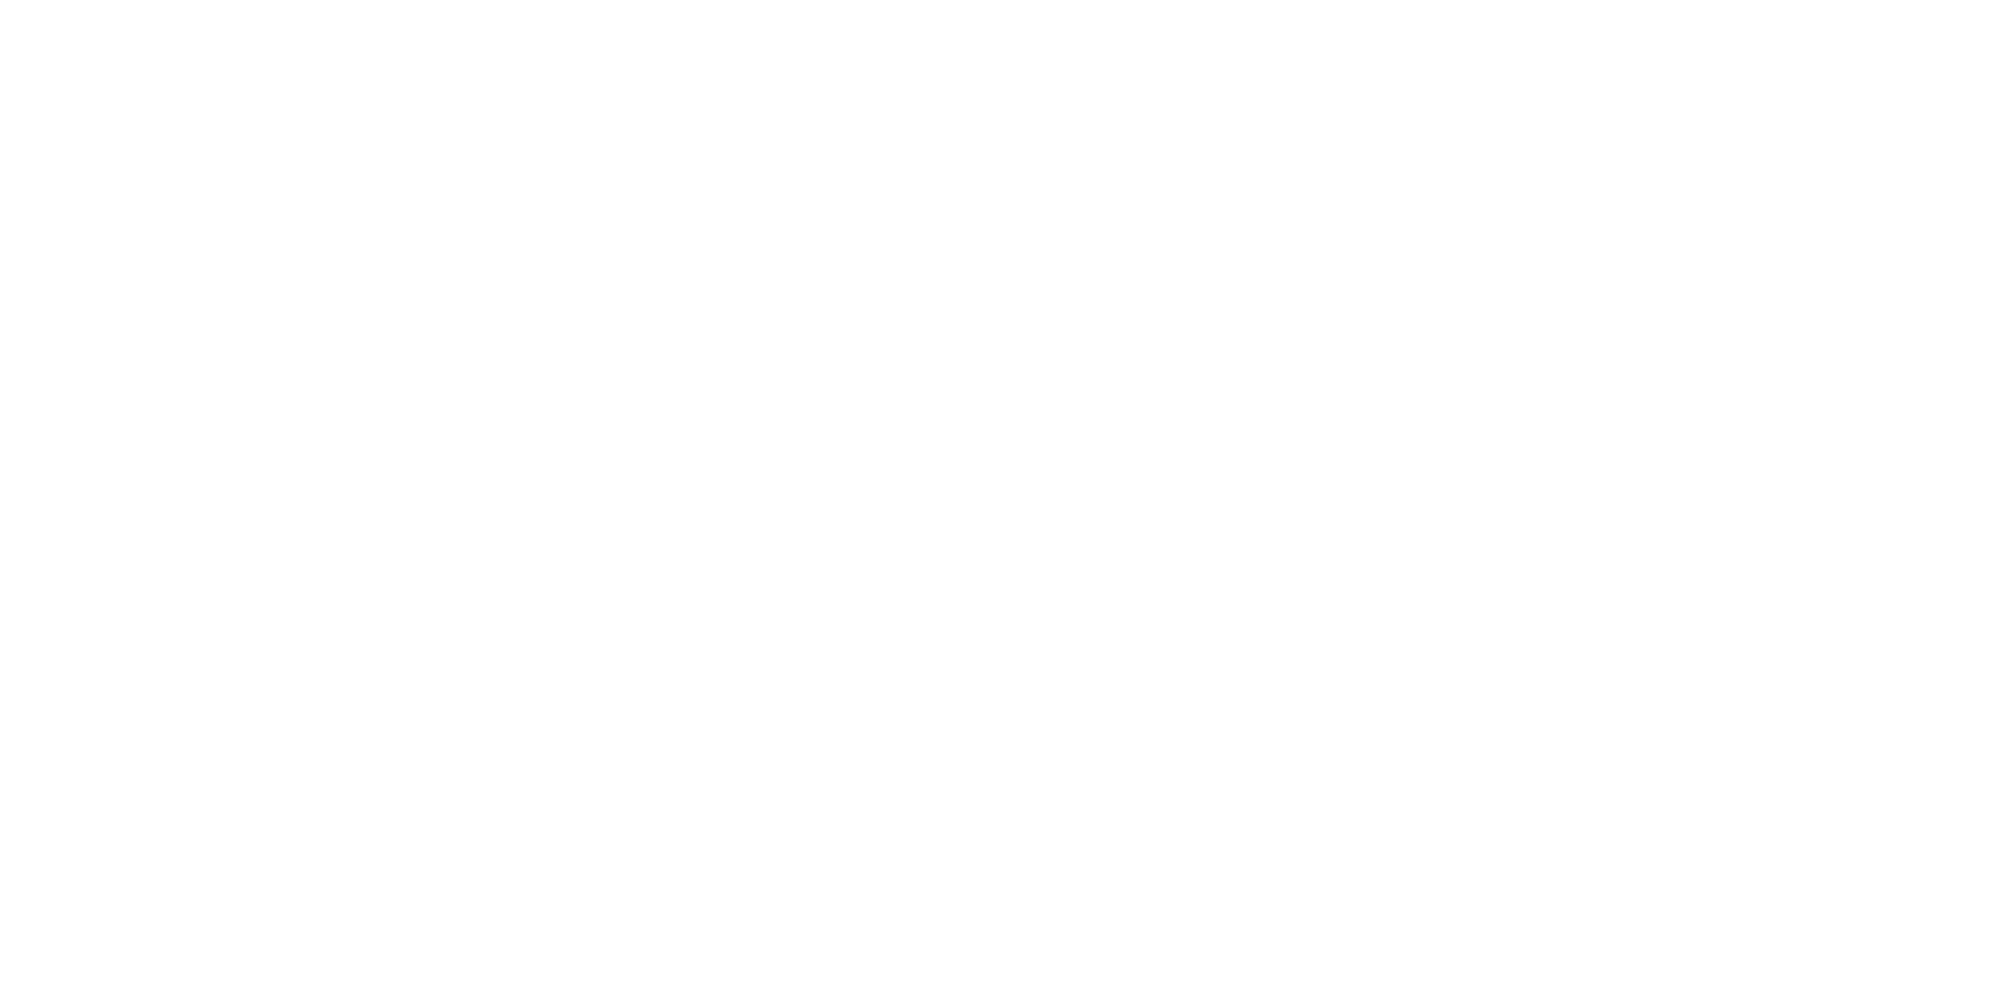 Chiropractor, Chiropractic, Business, Academy, Coaching, Training, Marketing, CBA, Practice, Expansion